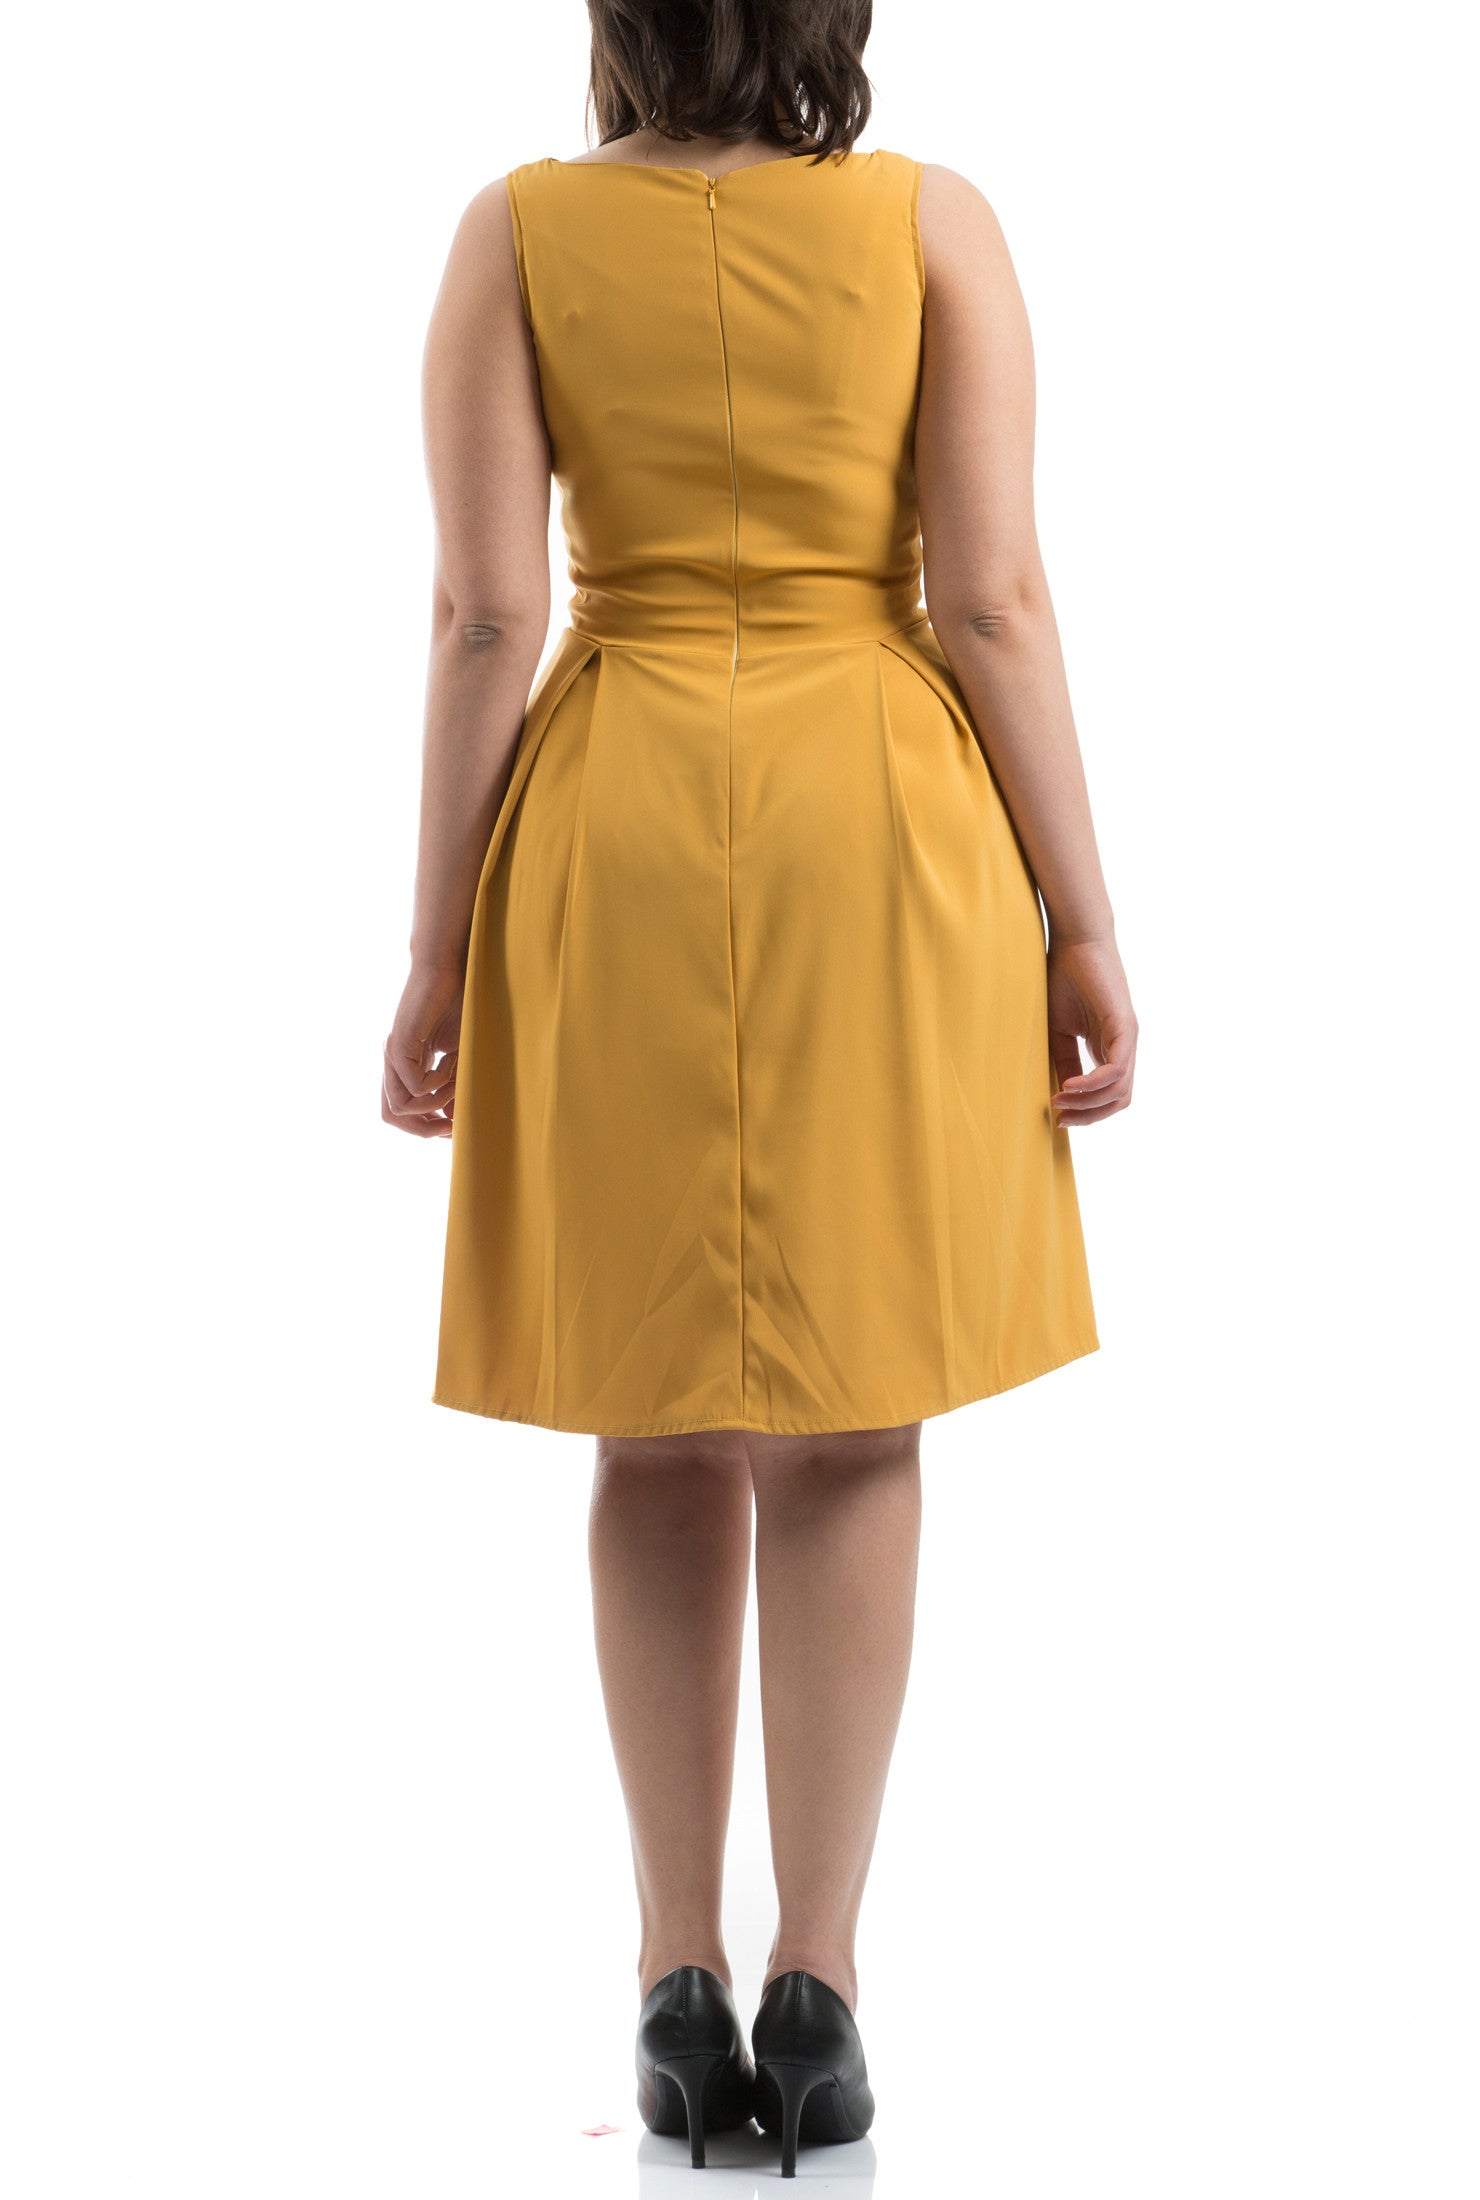 The Royal Pleated Dress - Mustard